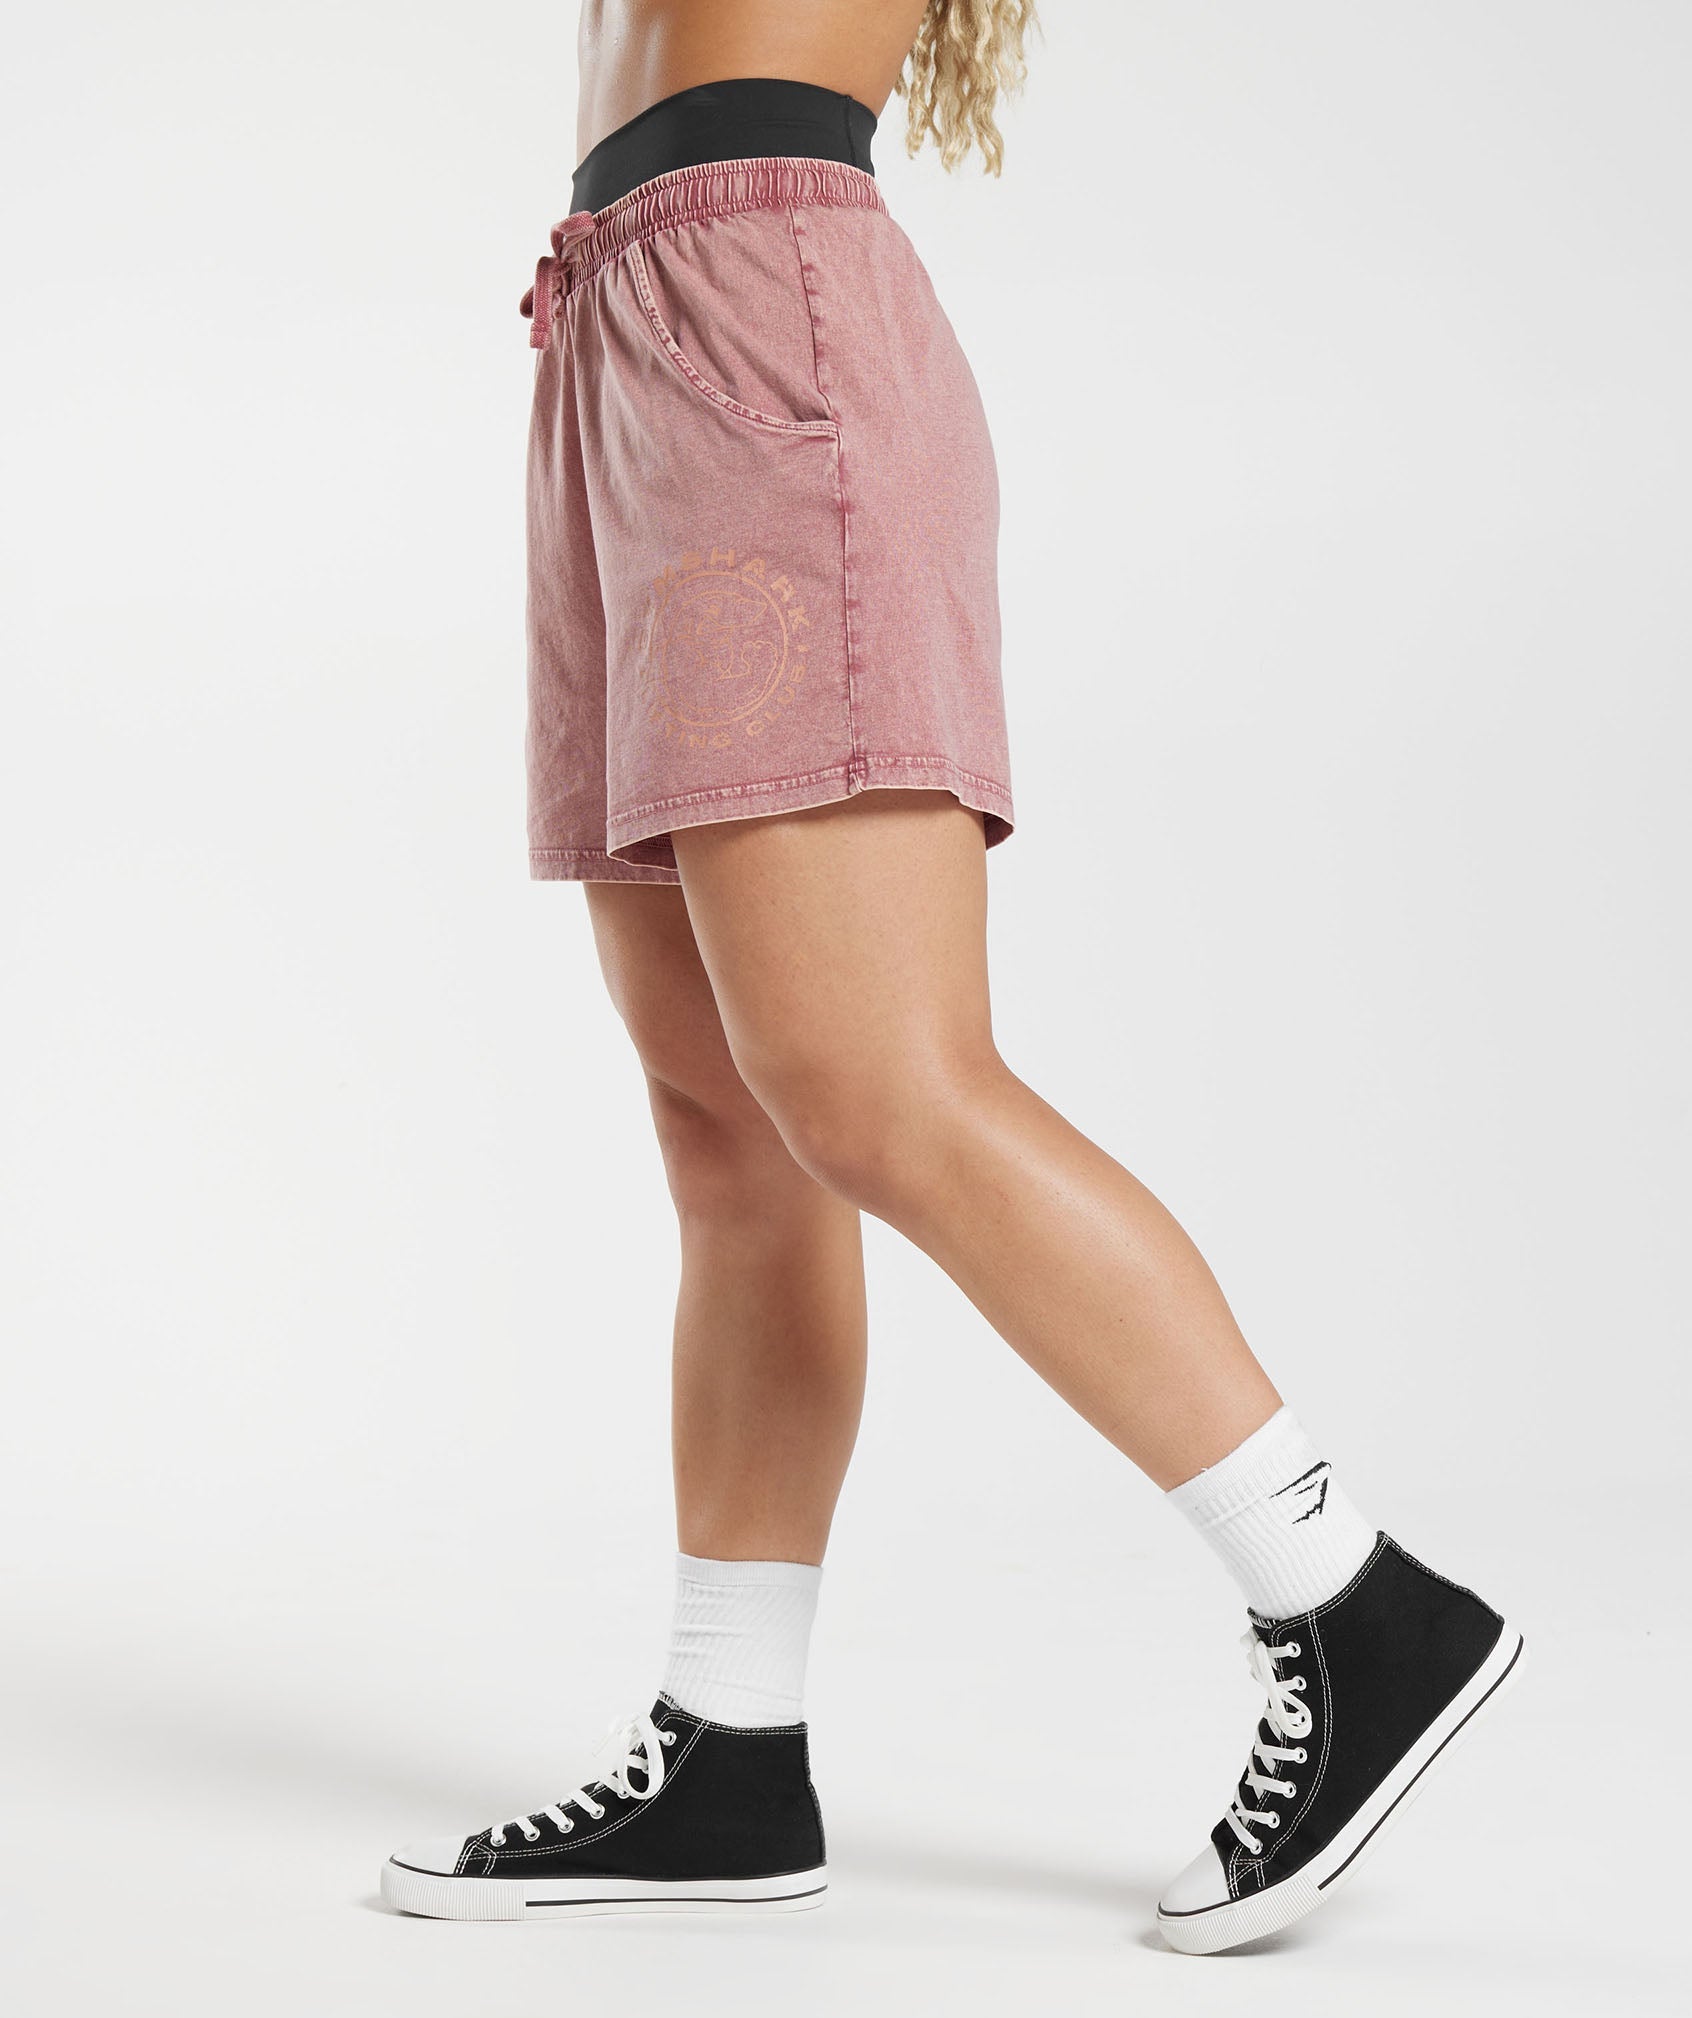 Legacy Loose Shorts in Terracotta Pink/Acid Wash - view 3